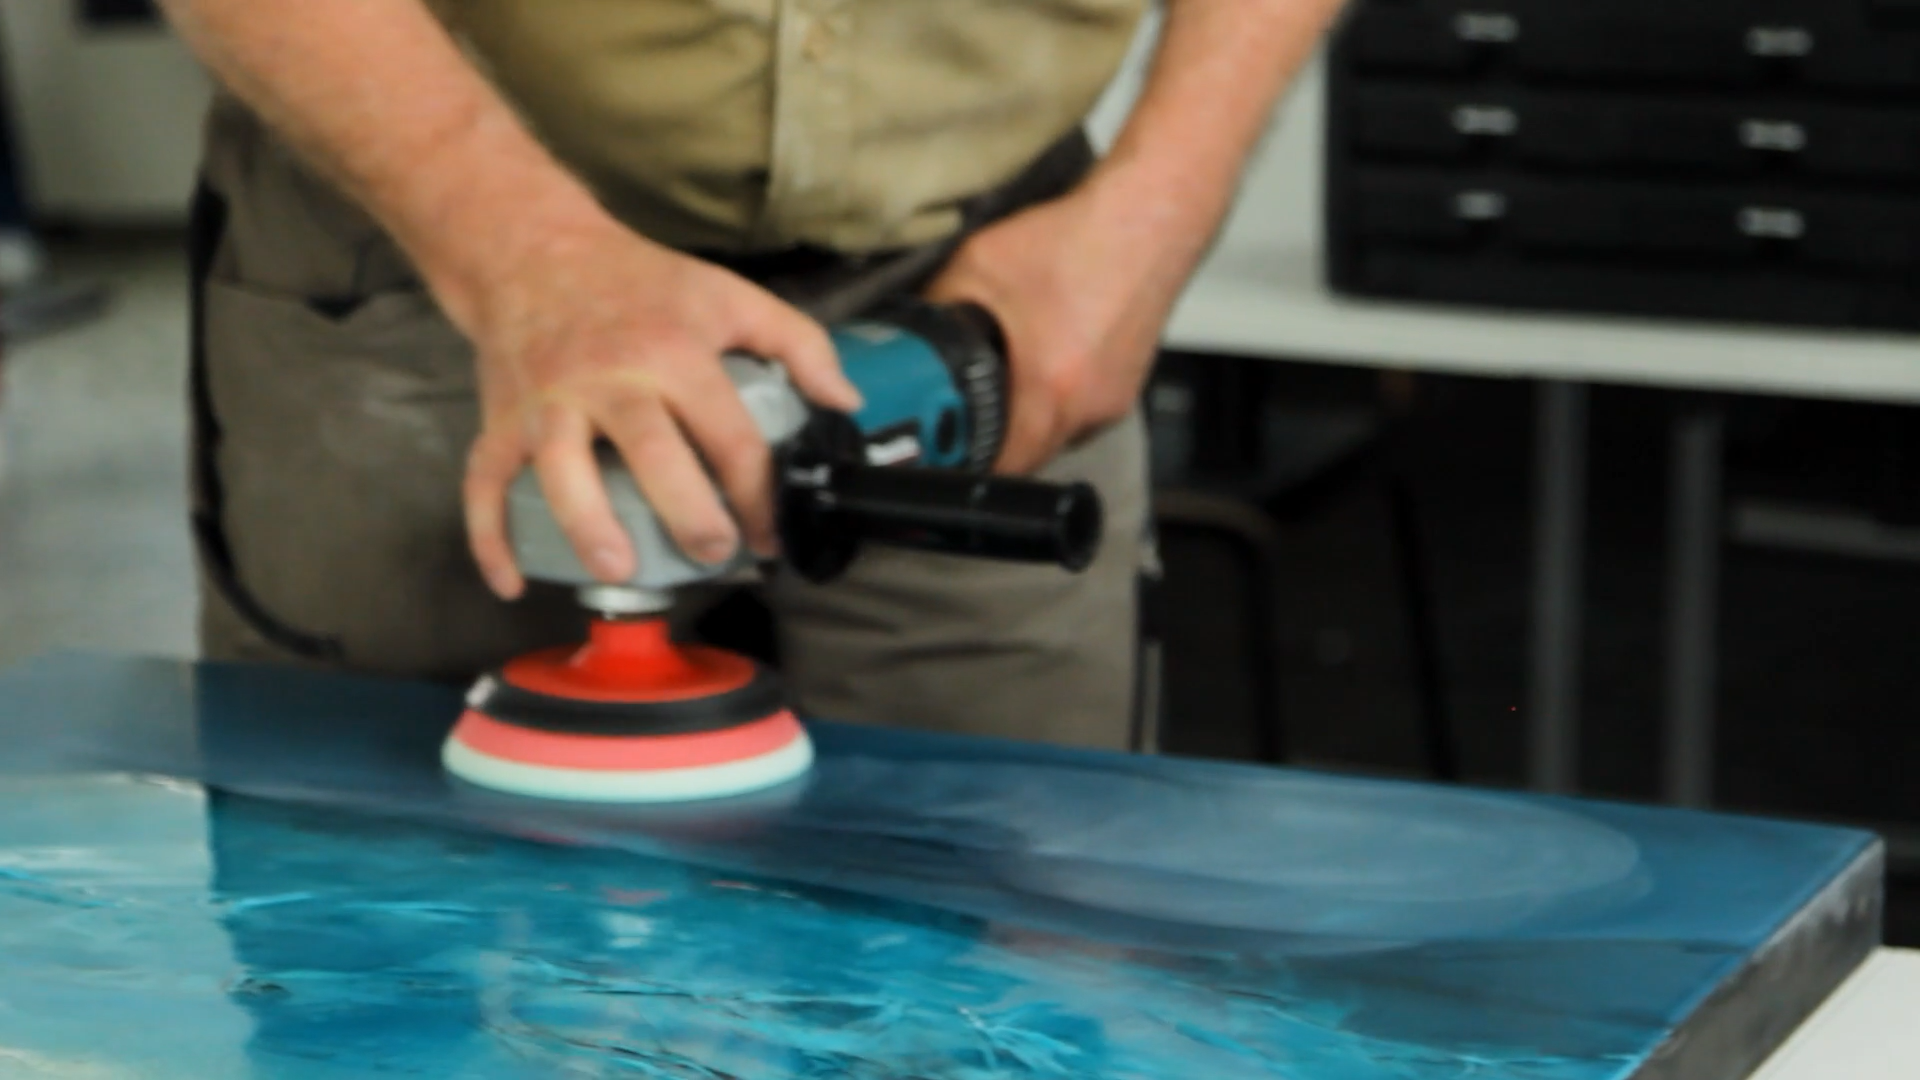 "Glossy Finish": Sanding and Polishing Resin Surfaces